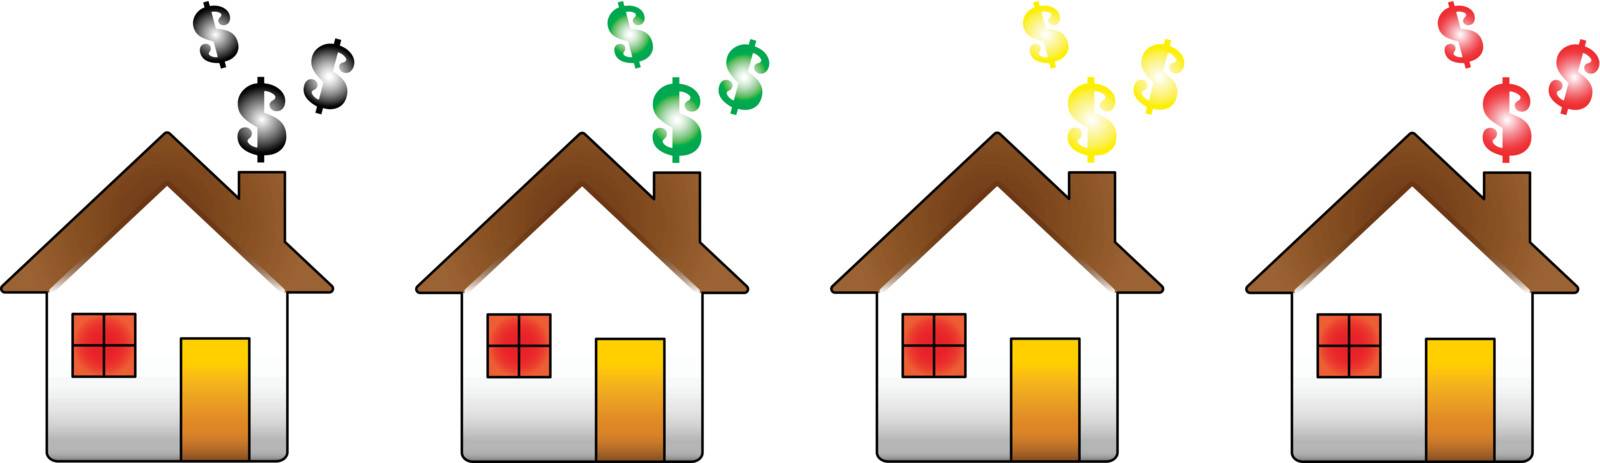 Houses showing the dollar symbol representing the financial crisis